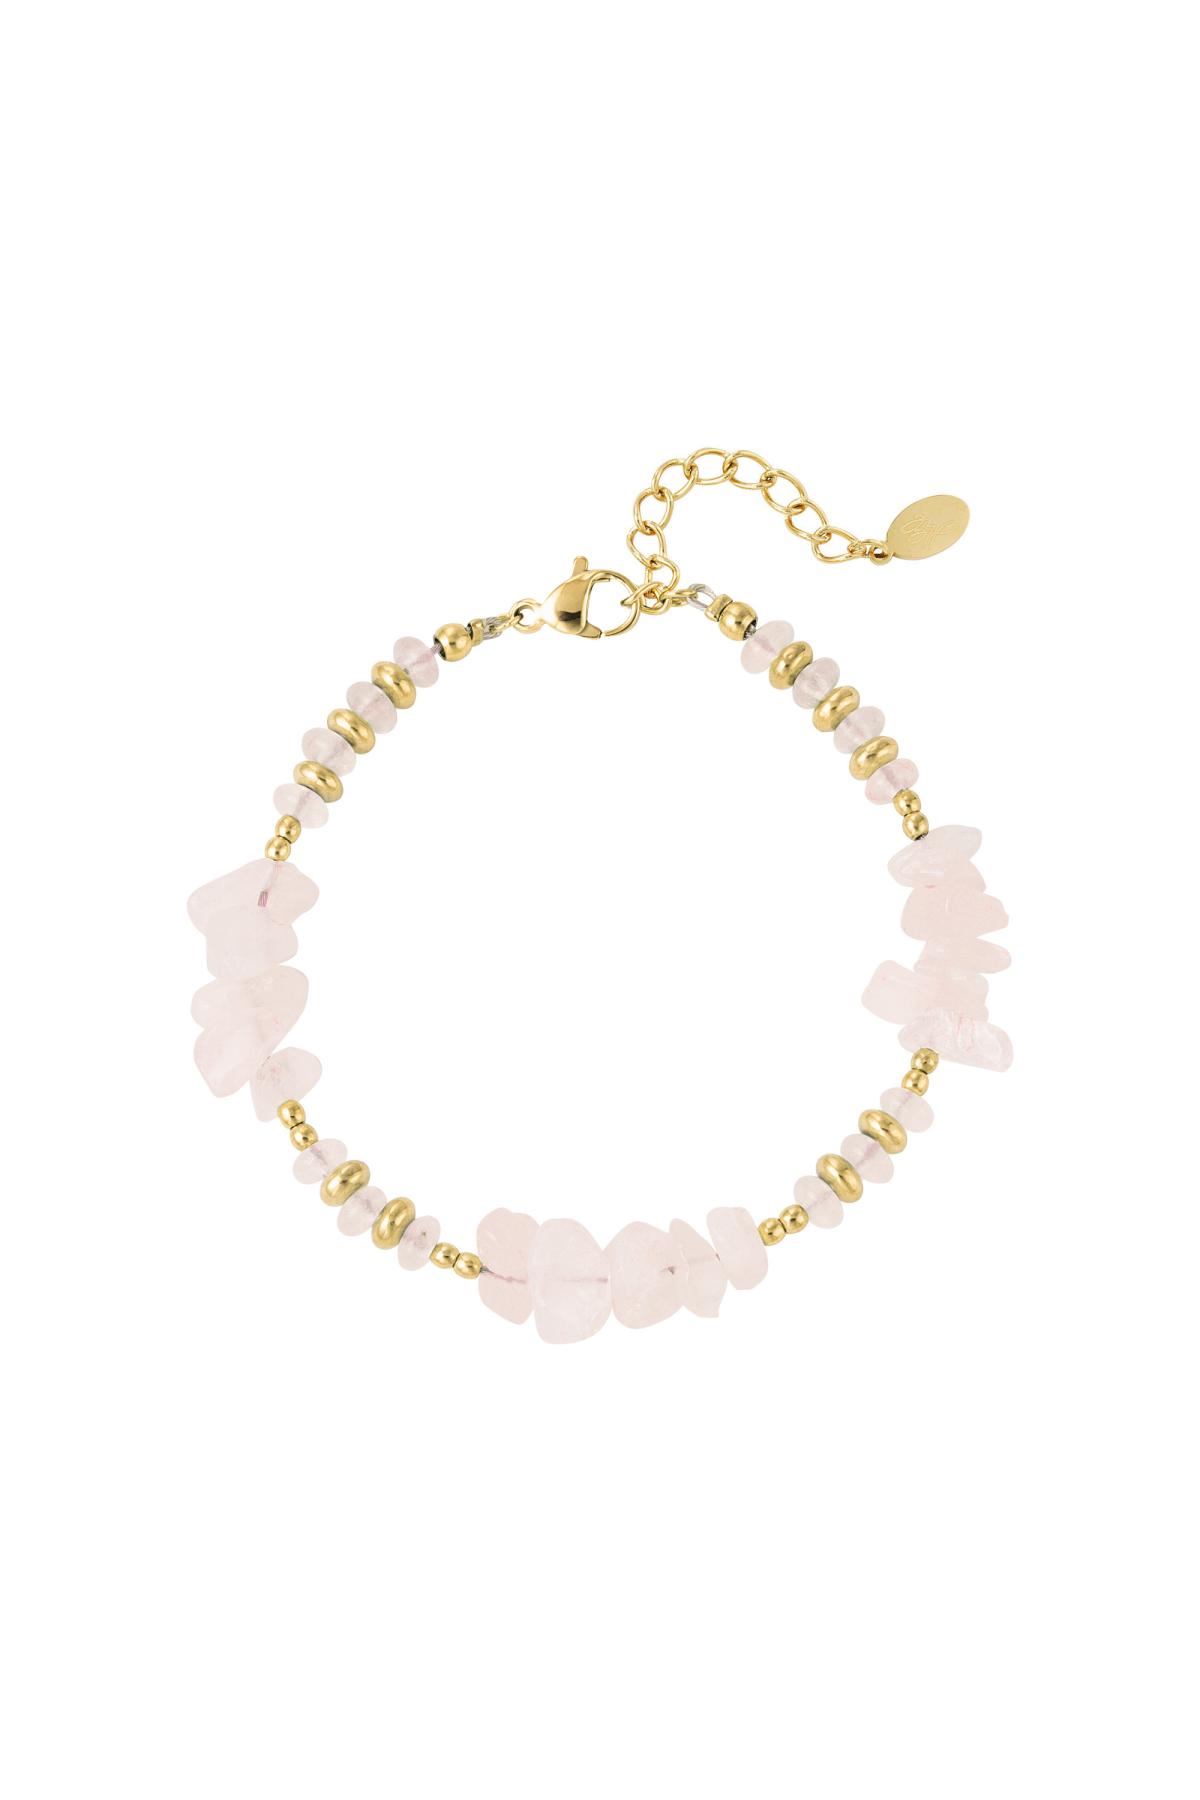 Bracelet different beads - Natural stones collection Pink & Gold 